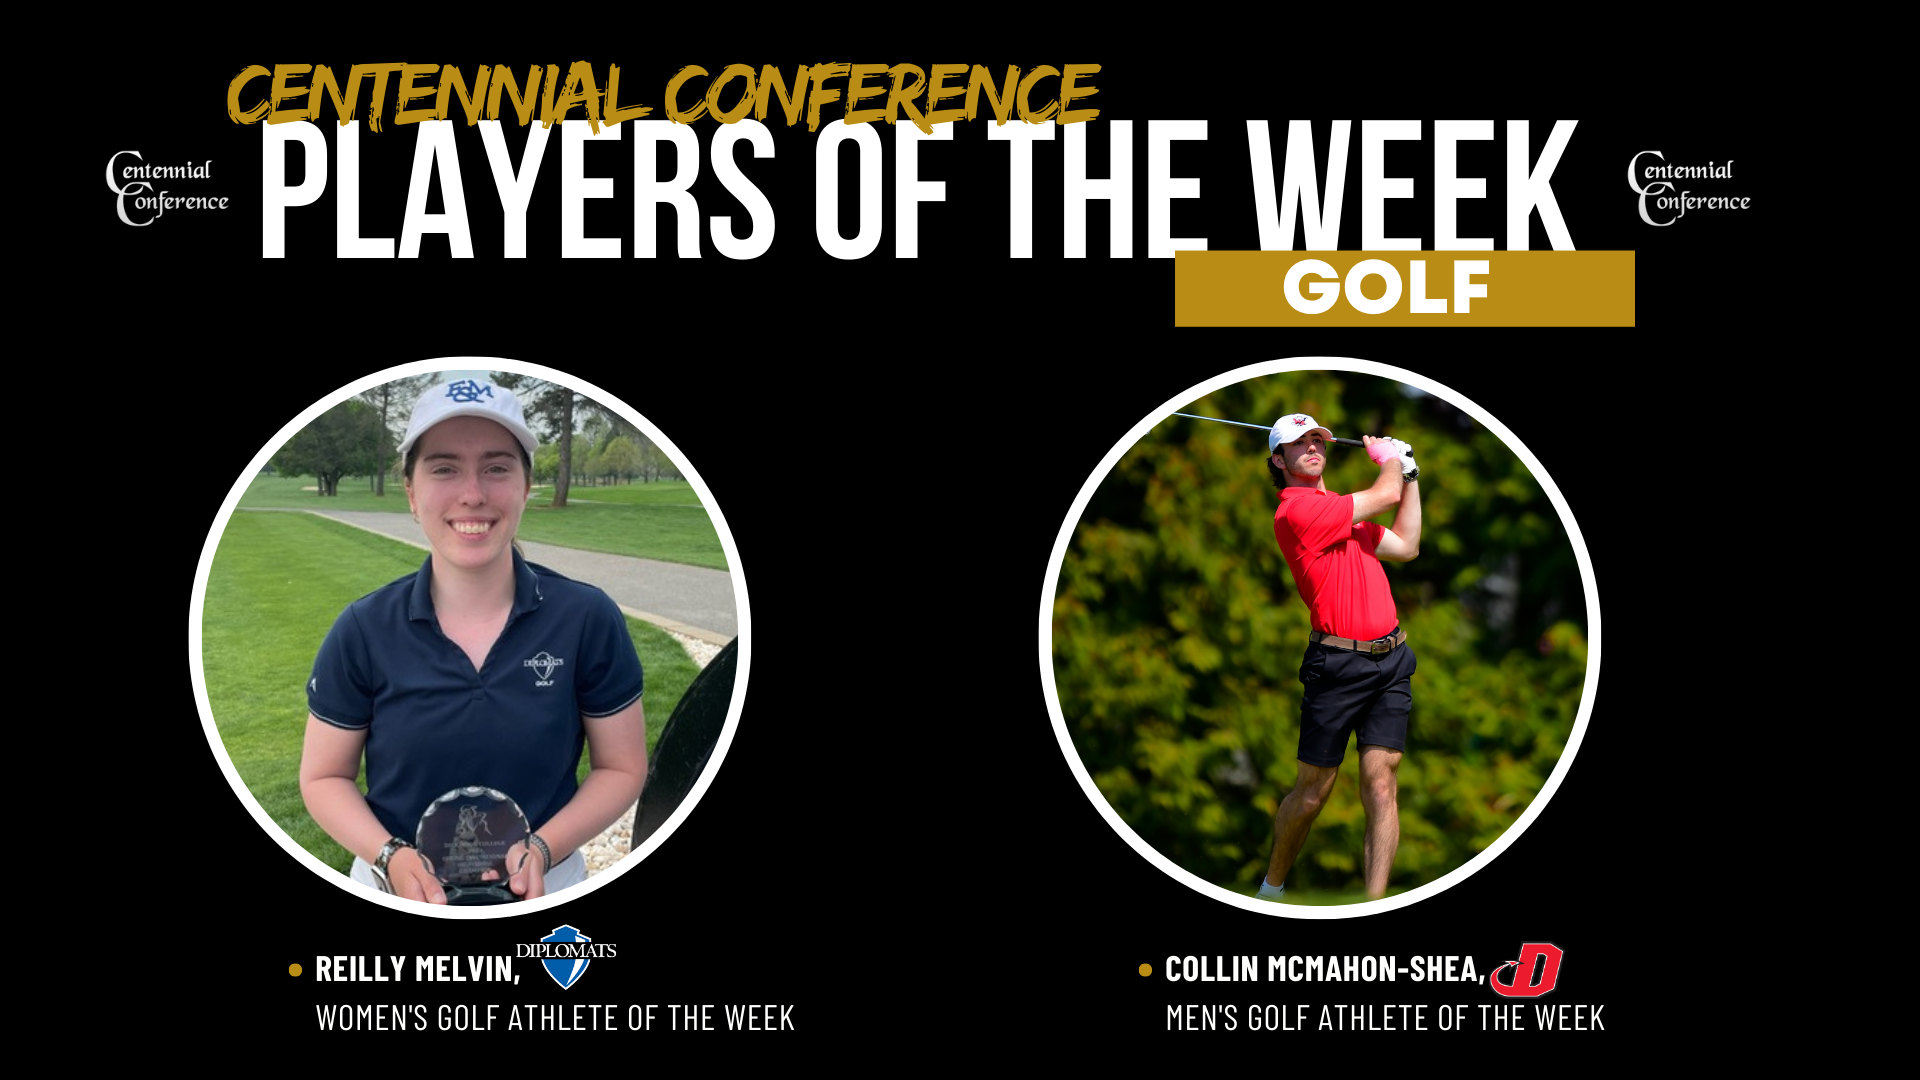 Reilly Melvin, Franklin & Marshall, Golfer of the Week